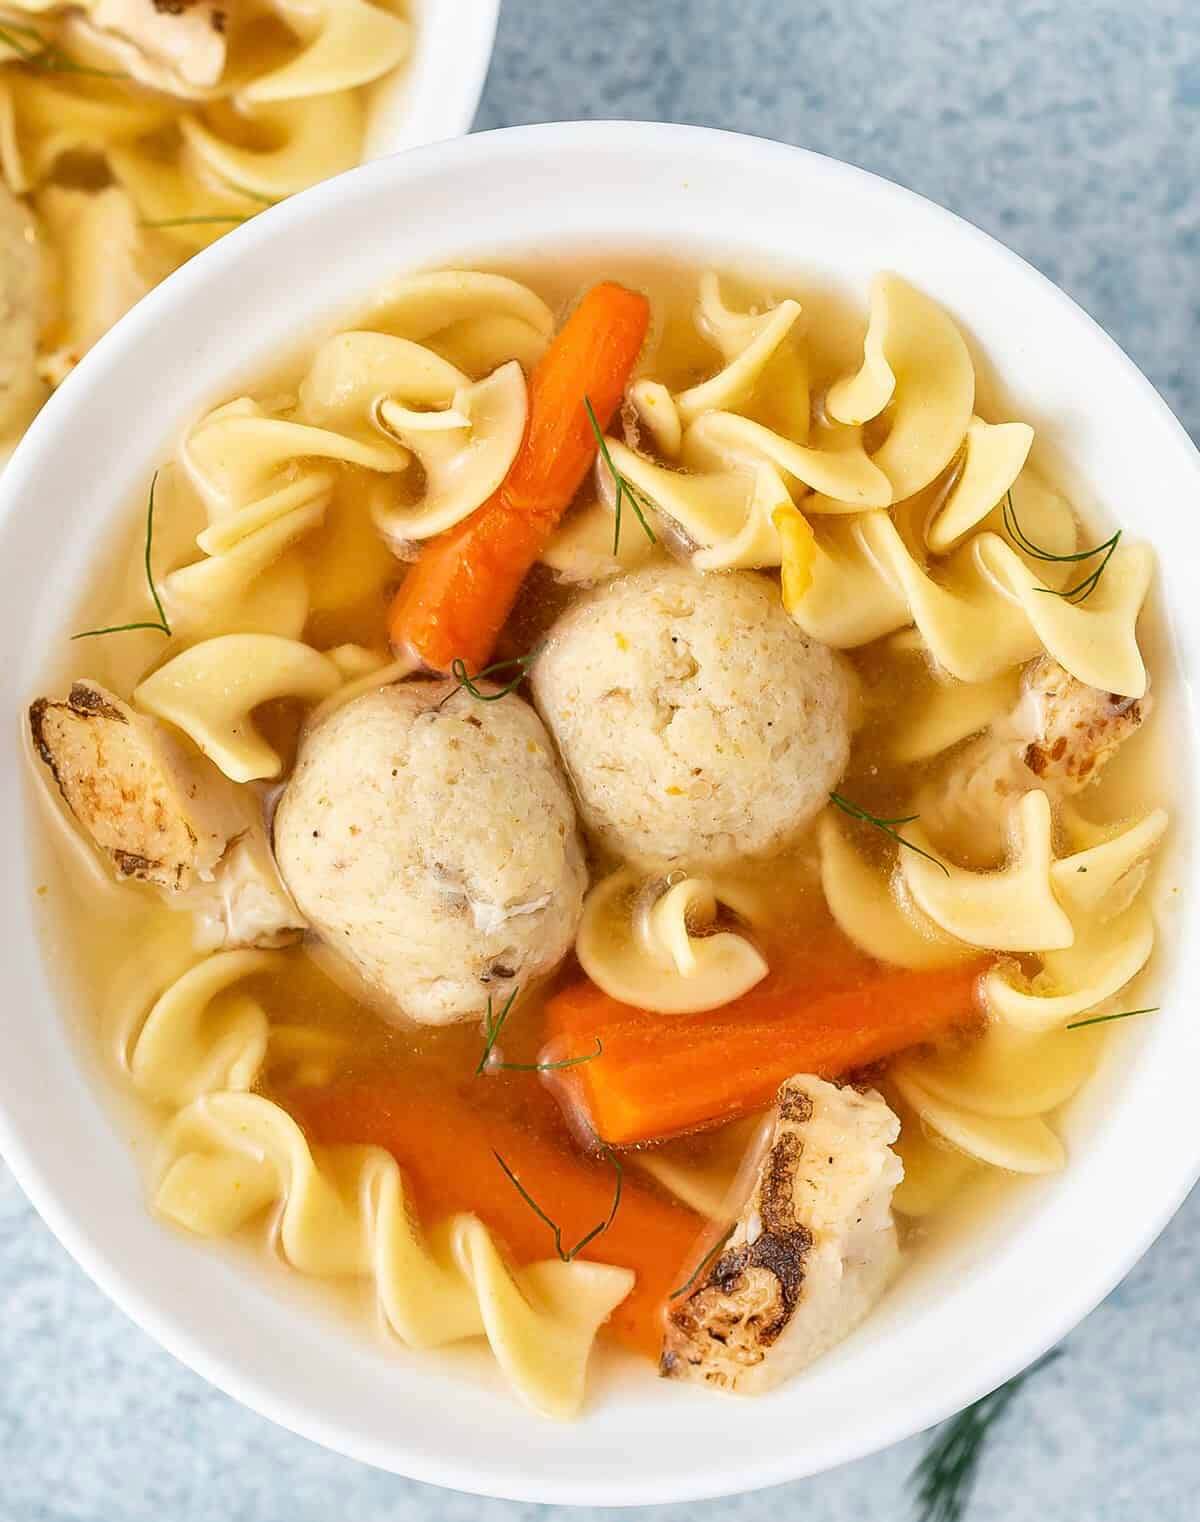 
Matzoh Ball Soup from NY Bagel Deli and Pizza in Orlando